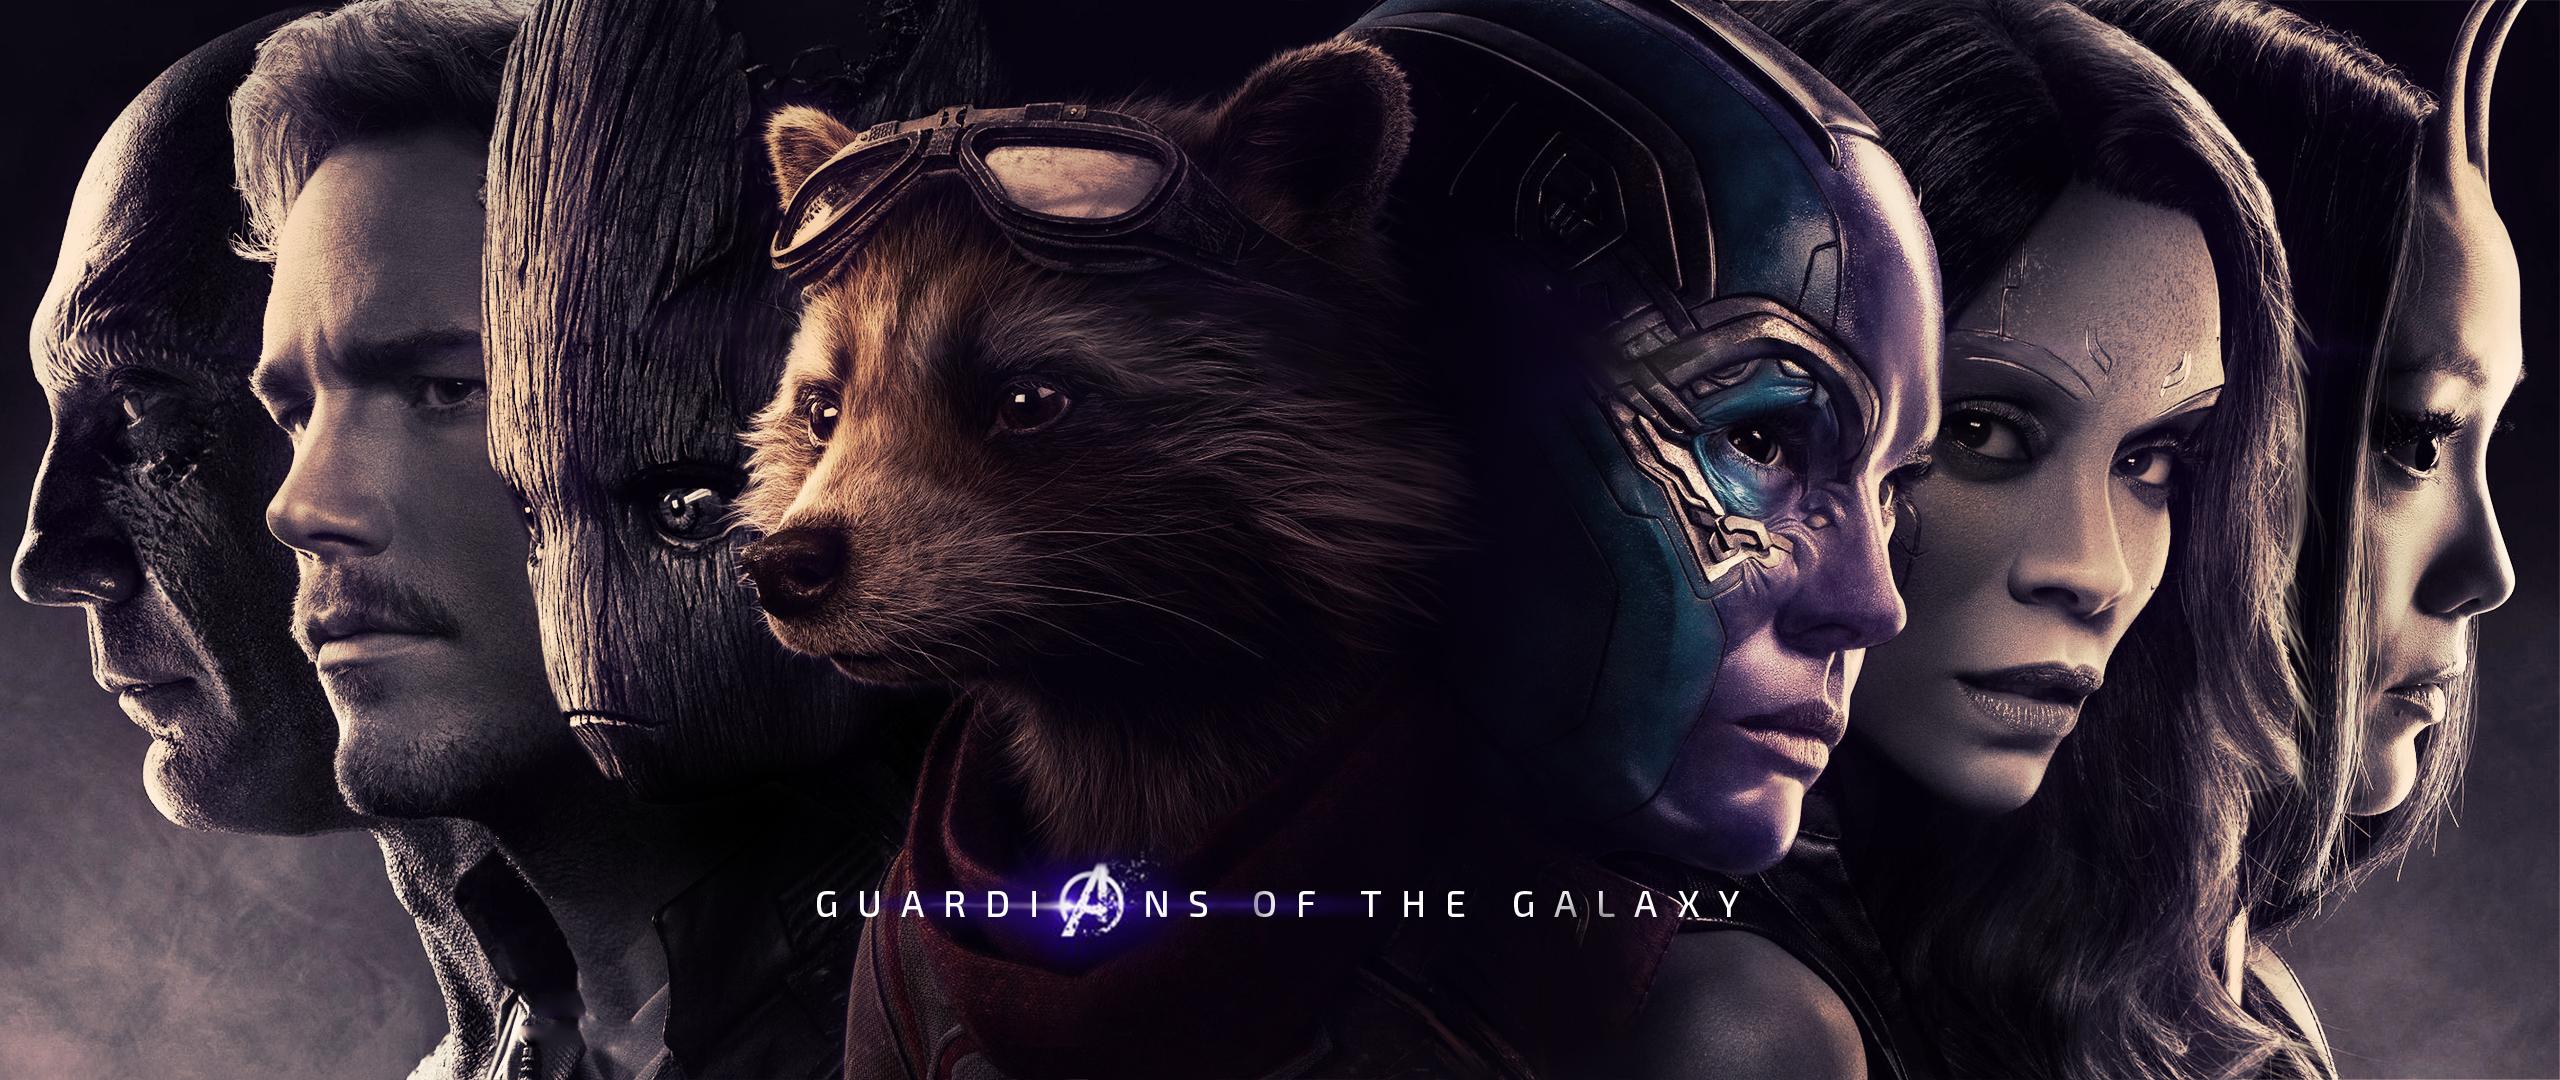 Guardians of the Galaxy posters (21x9 wallpaper)